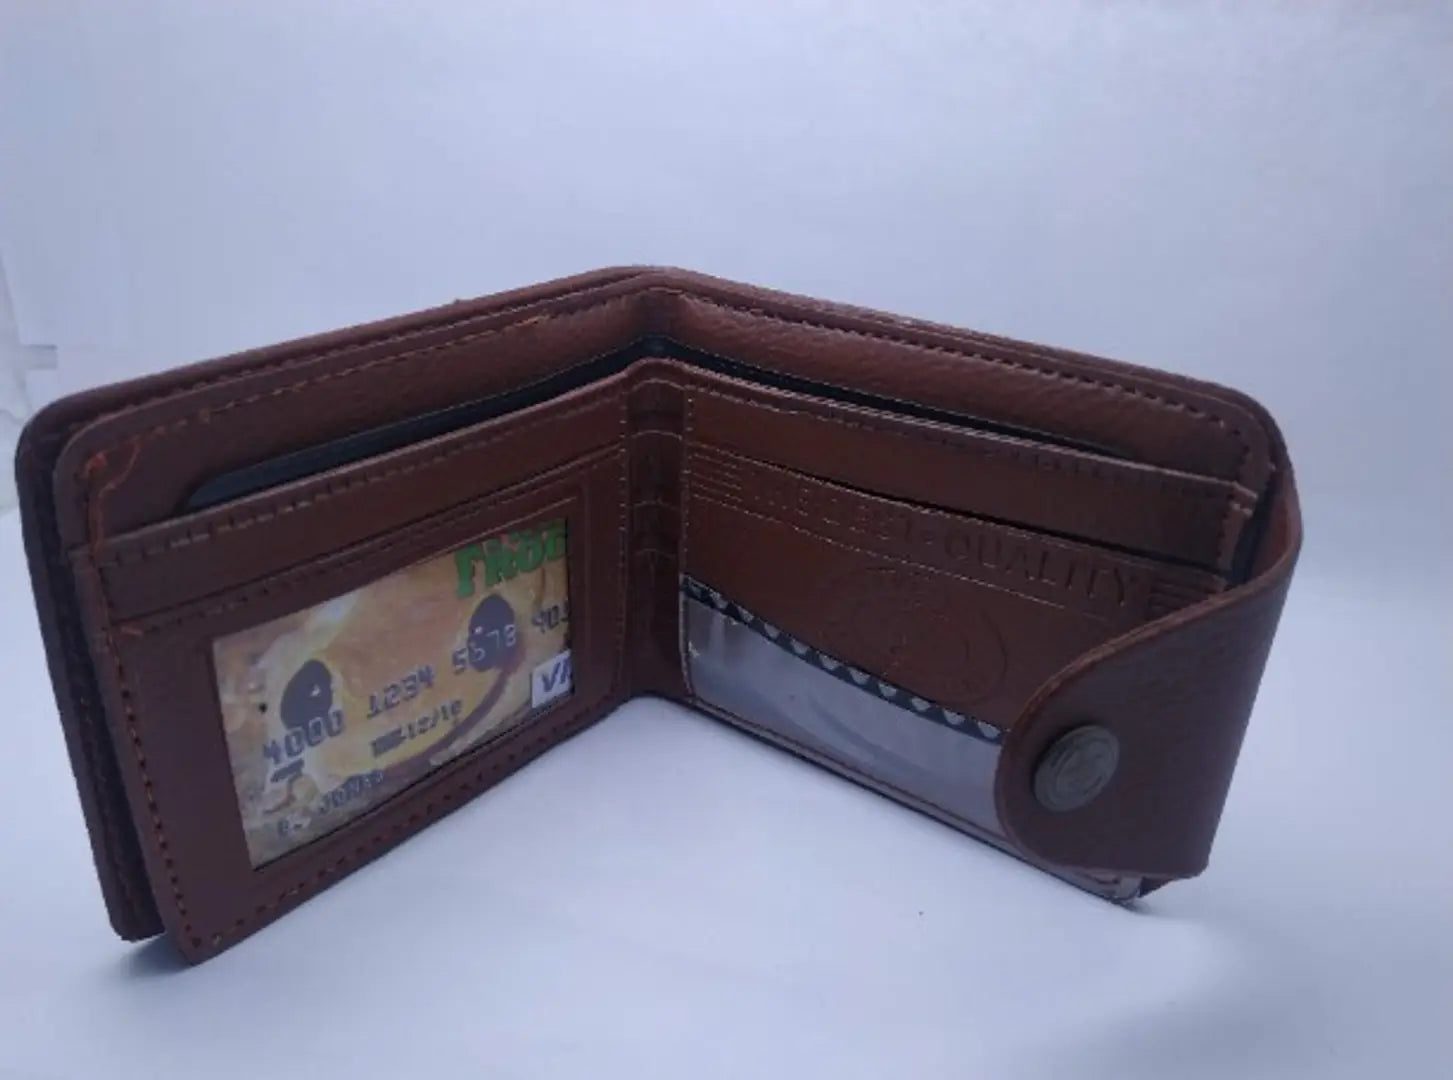 Attractive Leathertte Wallets